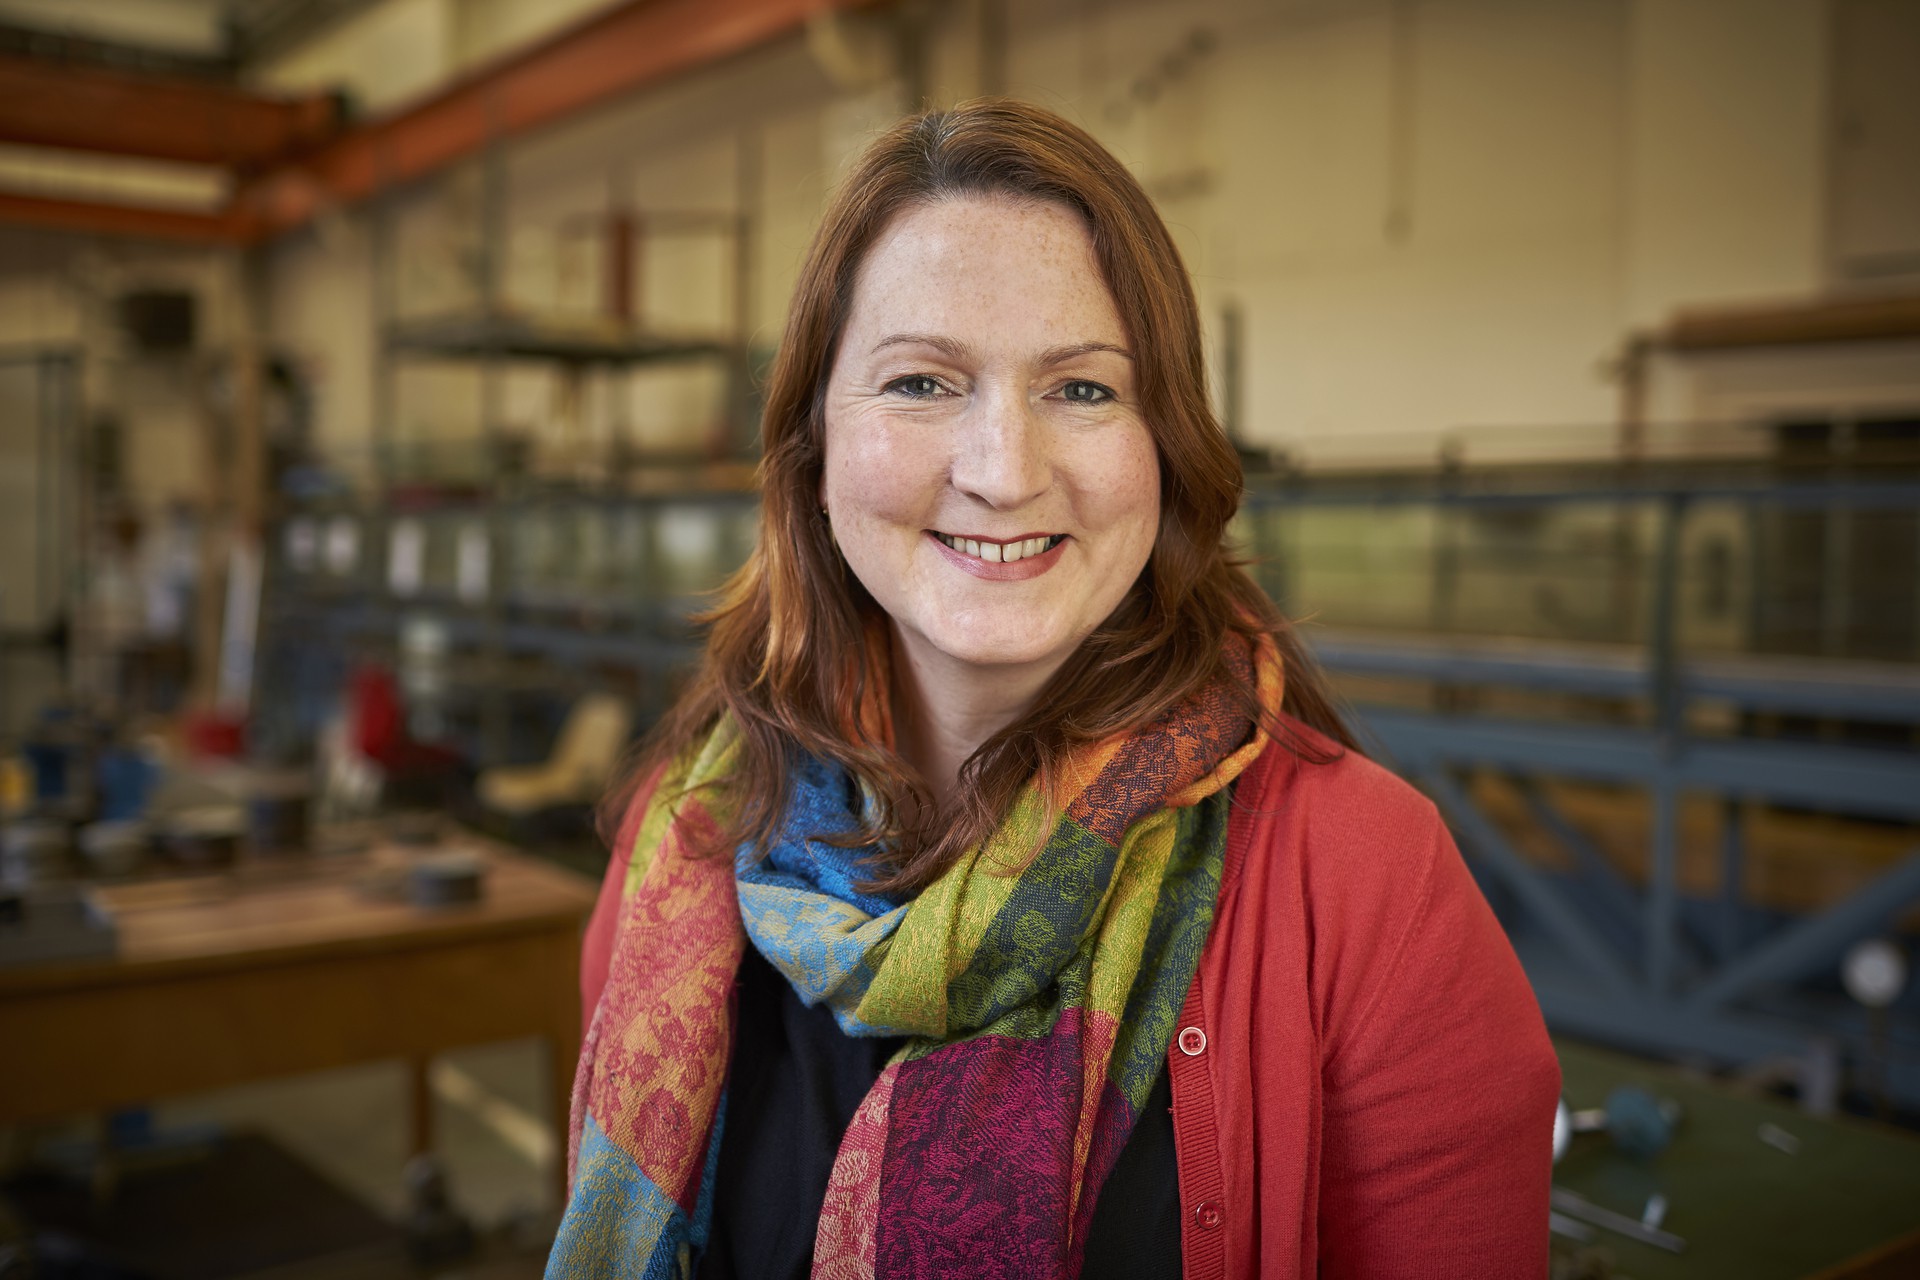 ICE Scotland has named Dr Rebecca Wade as STEM Ambassador of the Year